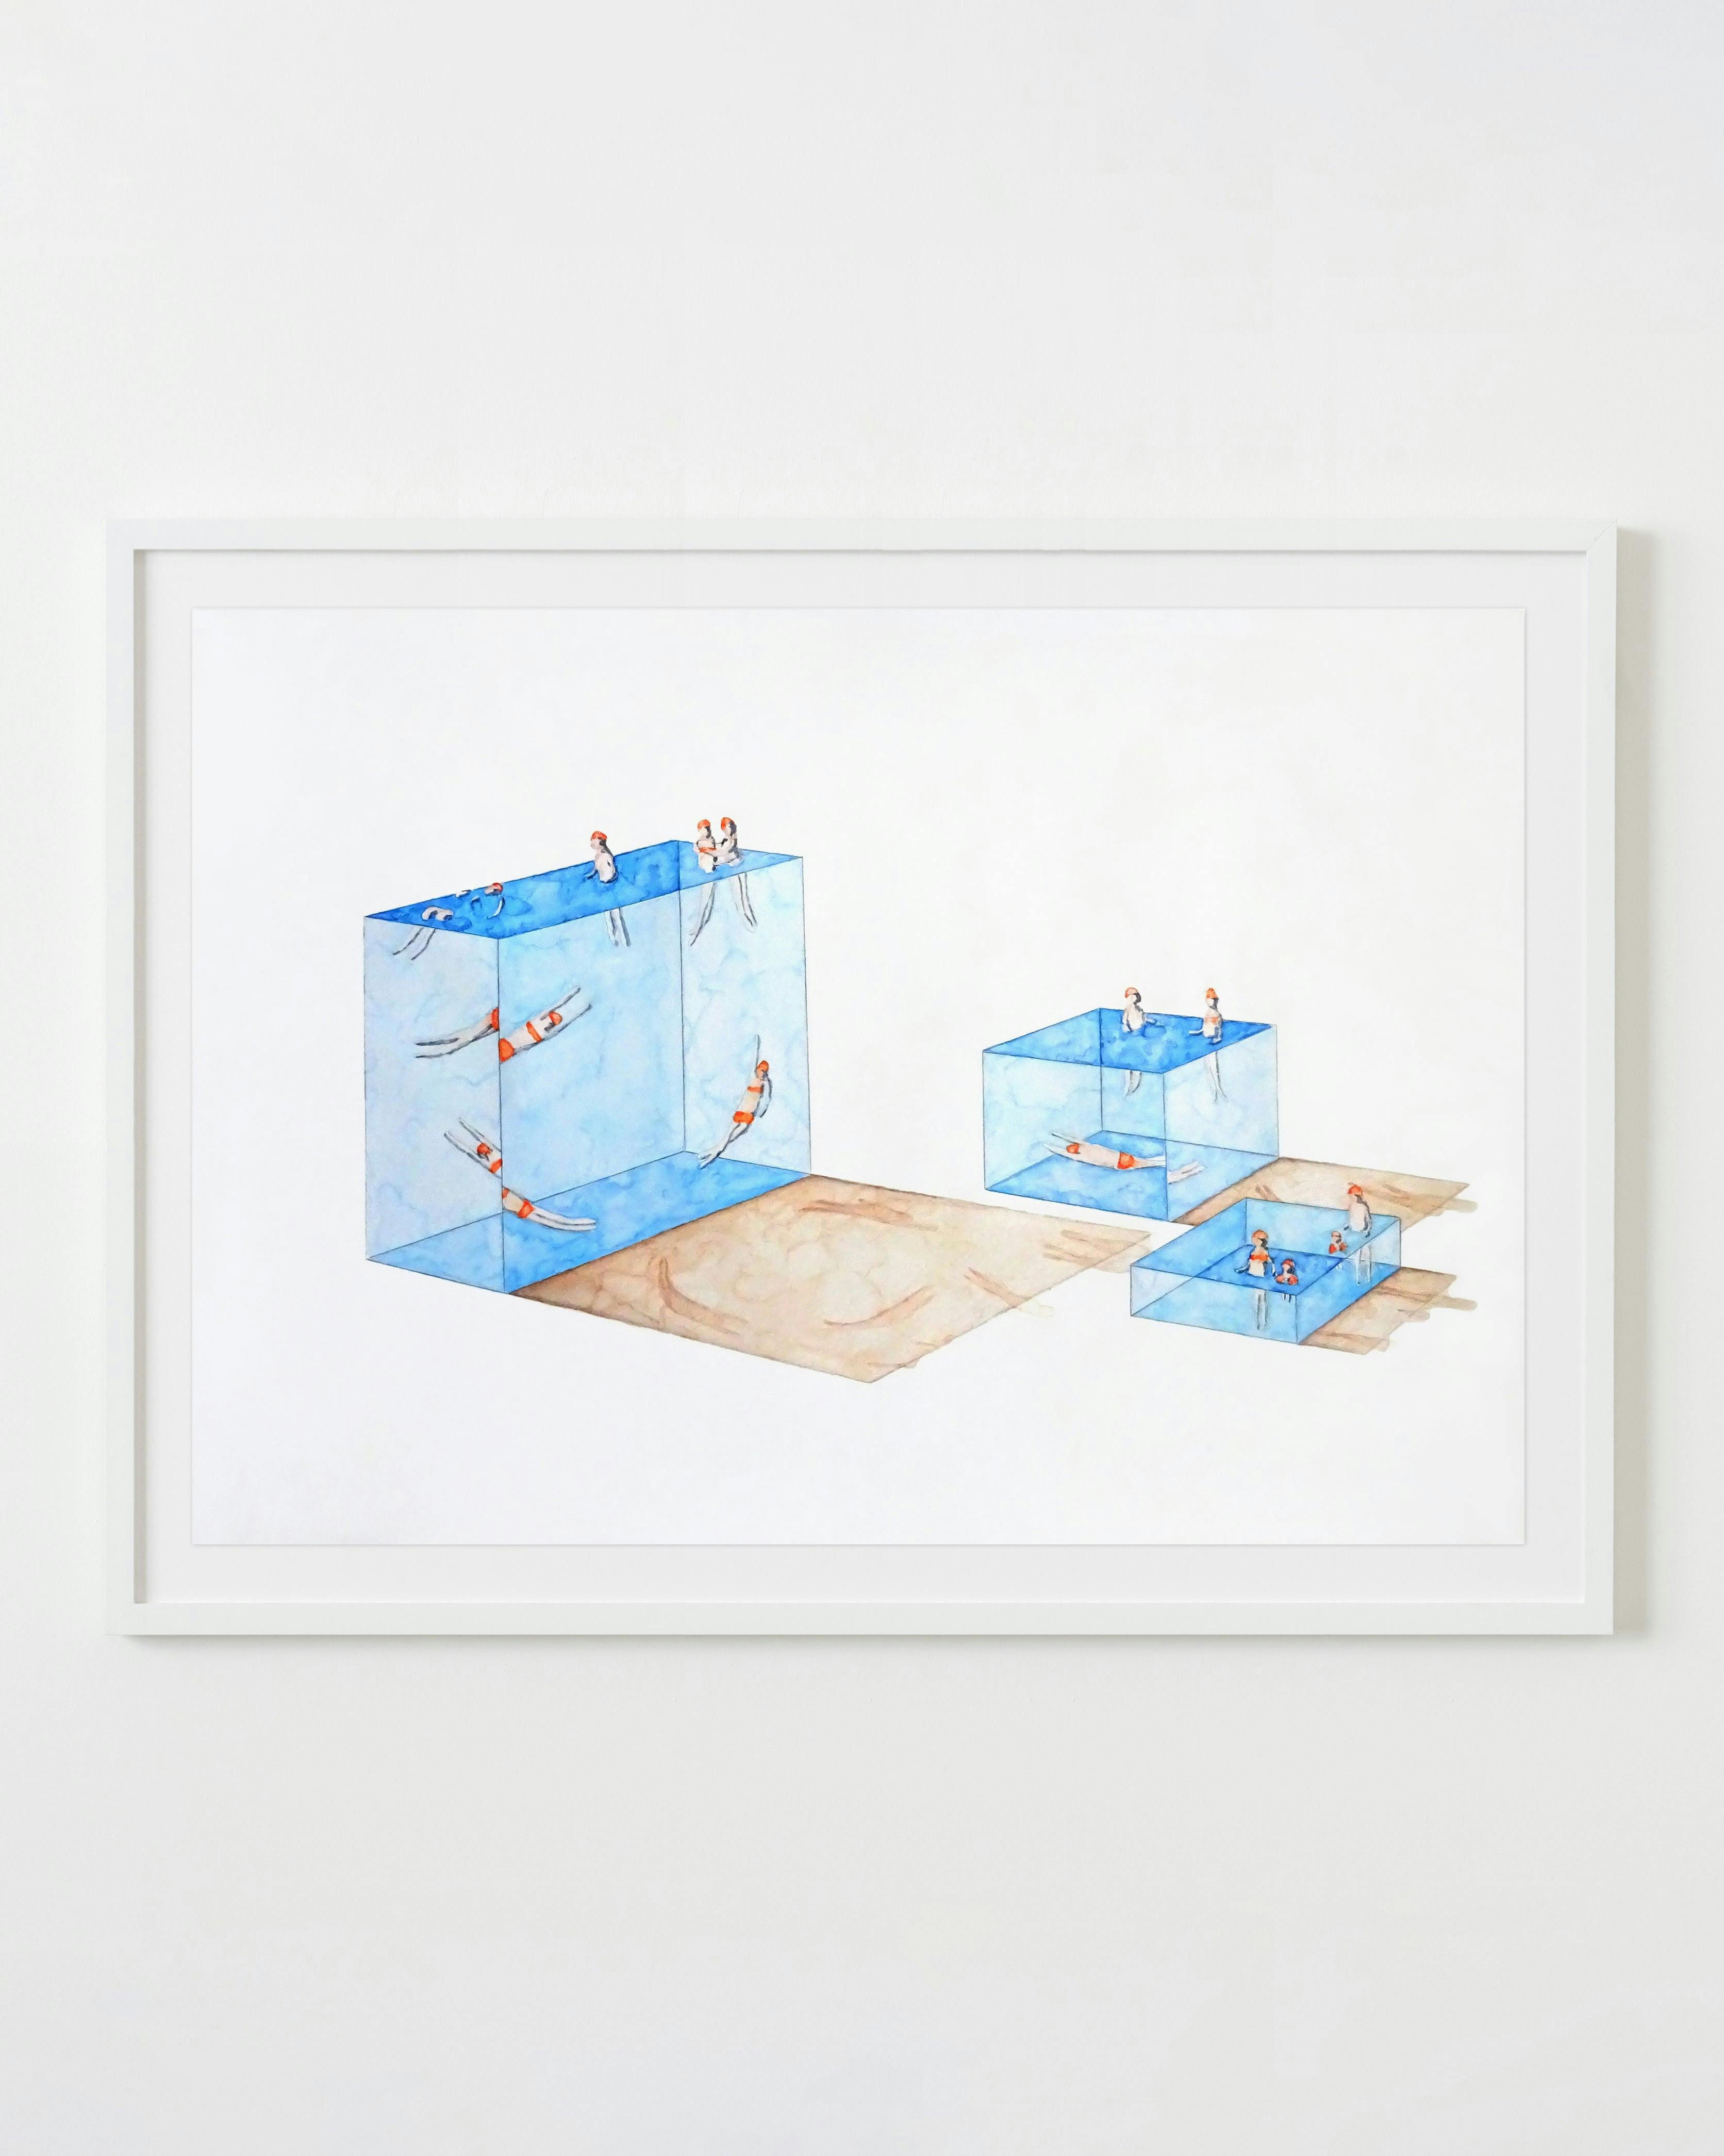 Drawing by Eddie K titled "Pools V33-35 watercolour".